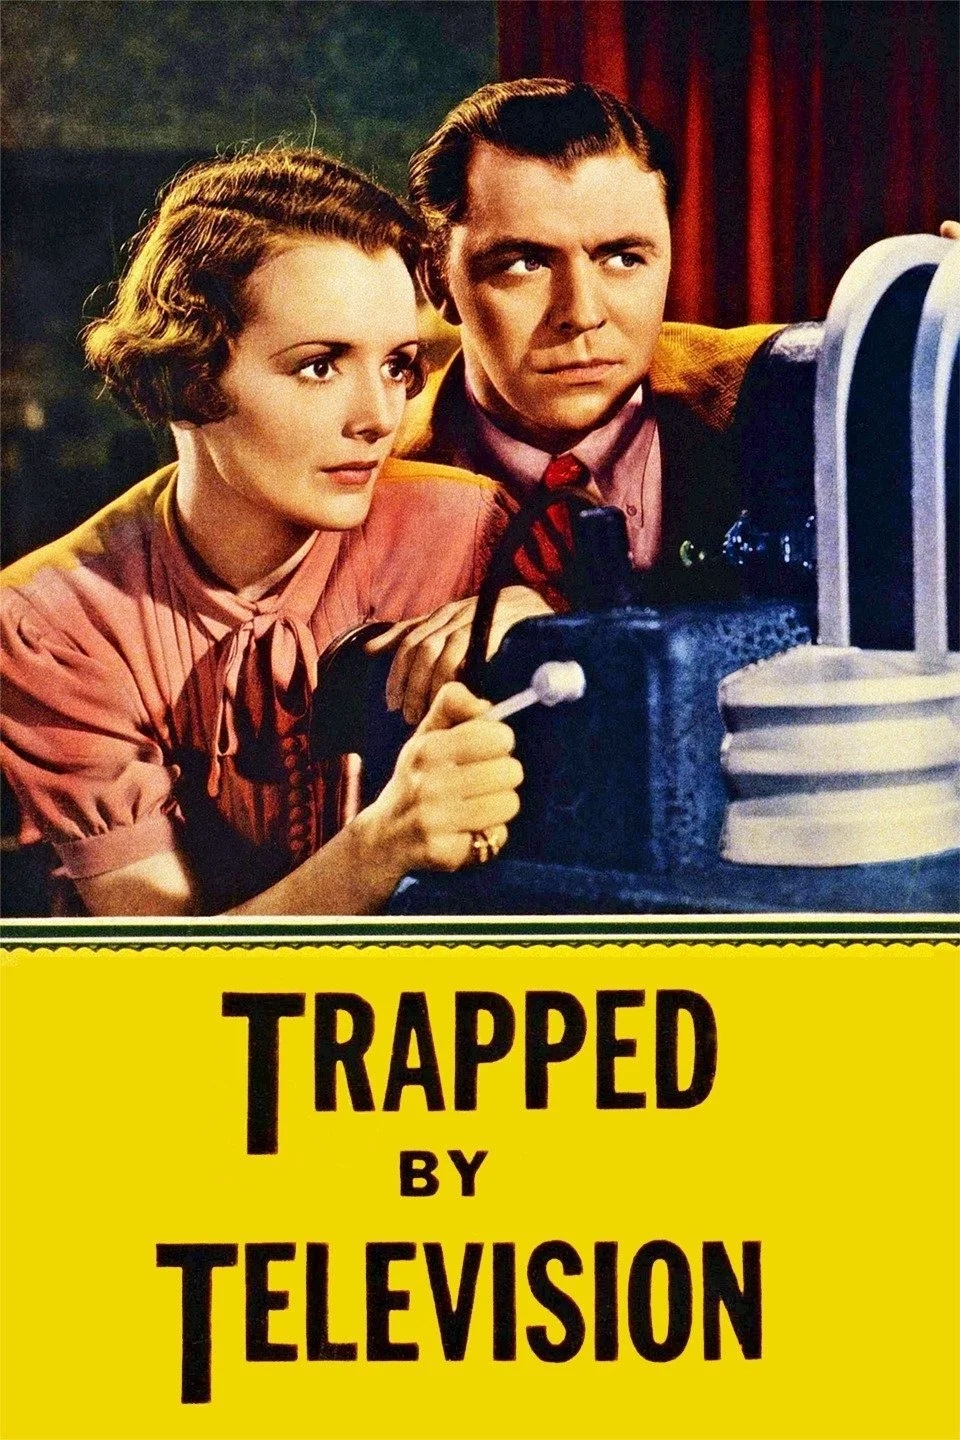 Trapped by Television (1936) Screenshot 5 